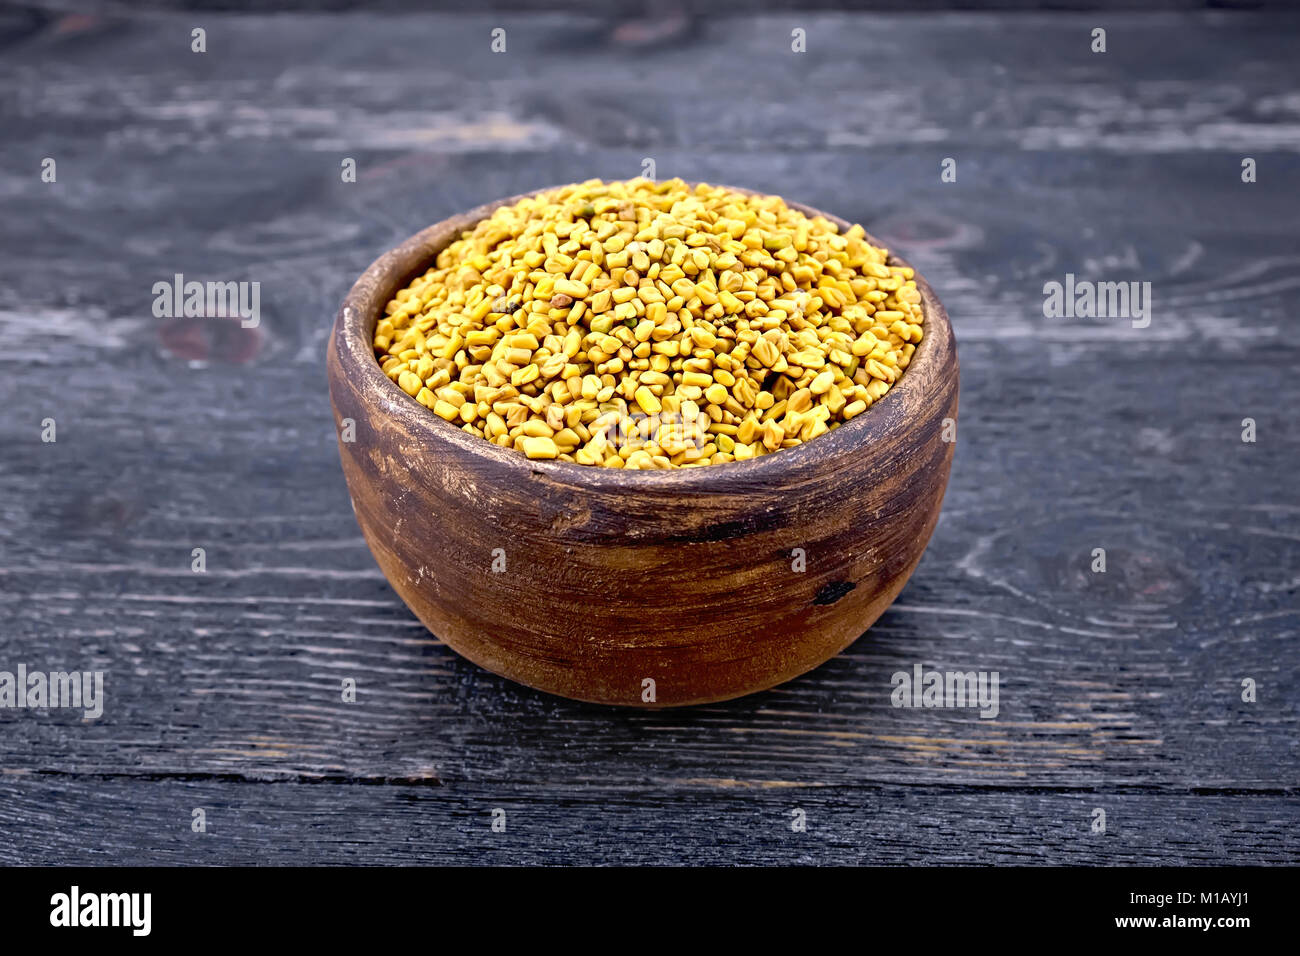 Fenugreek seeds in a clay bowl on the background of a black wooden board Stock Photo